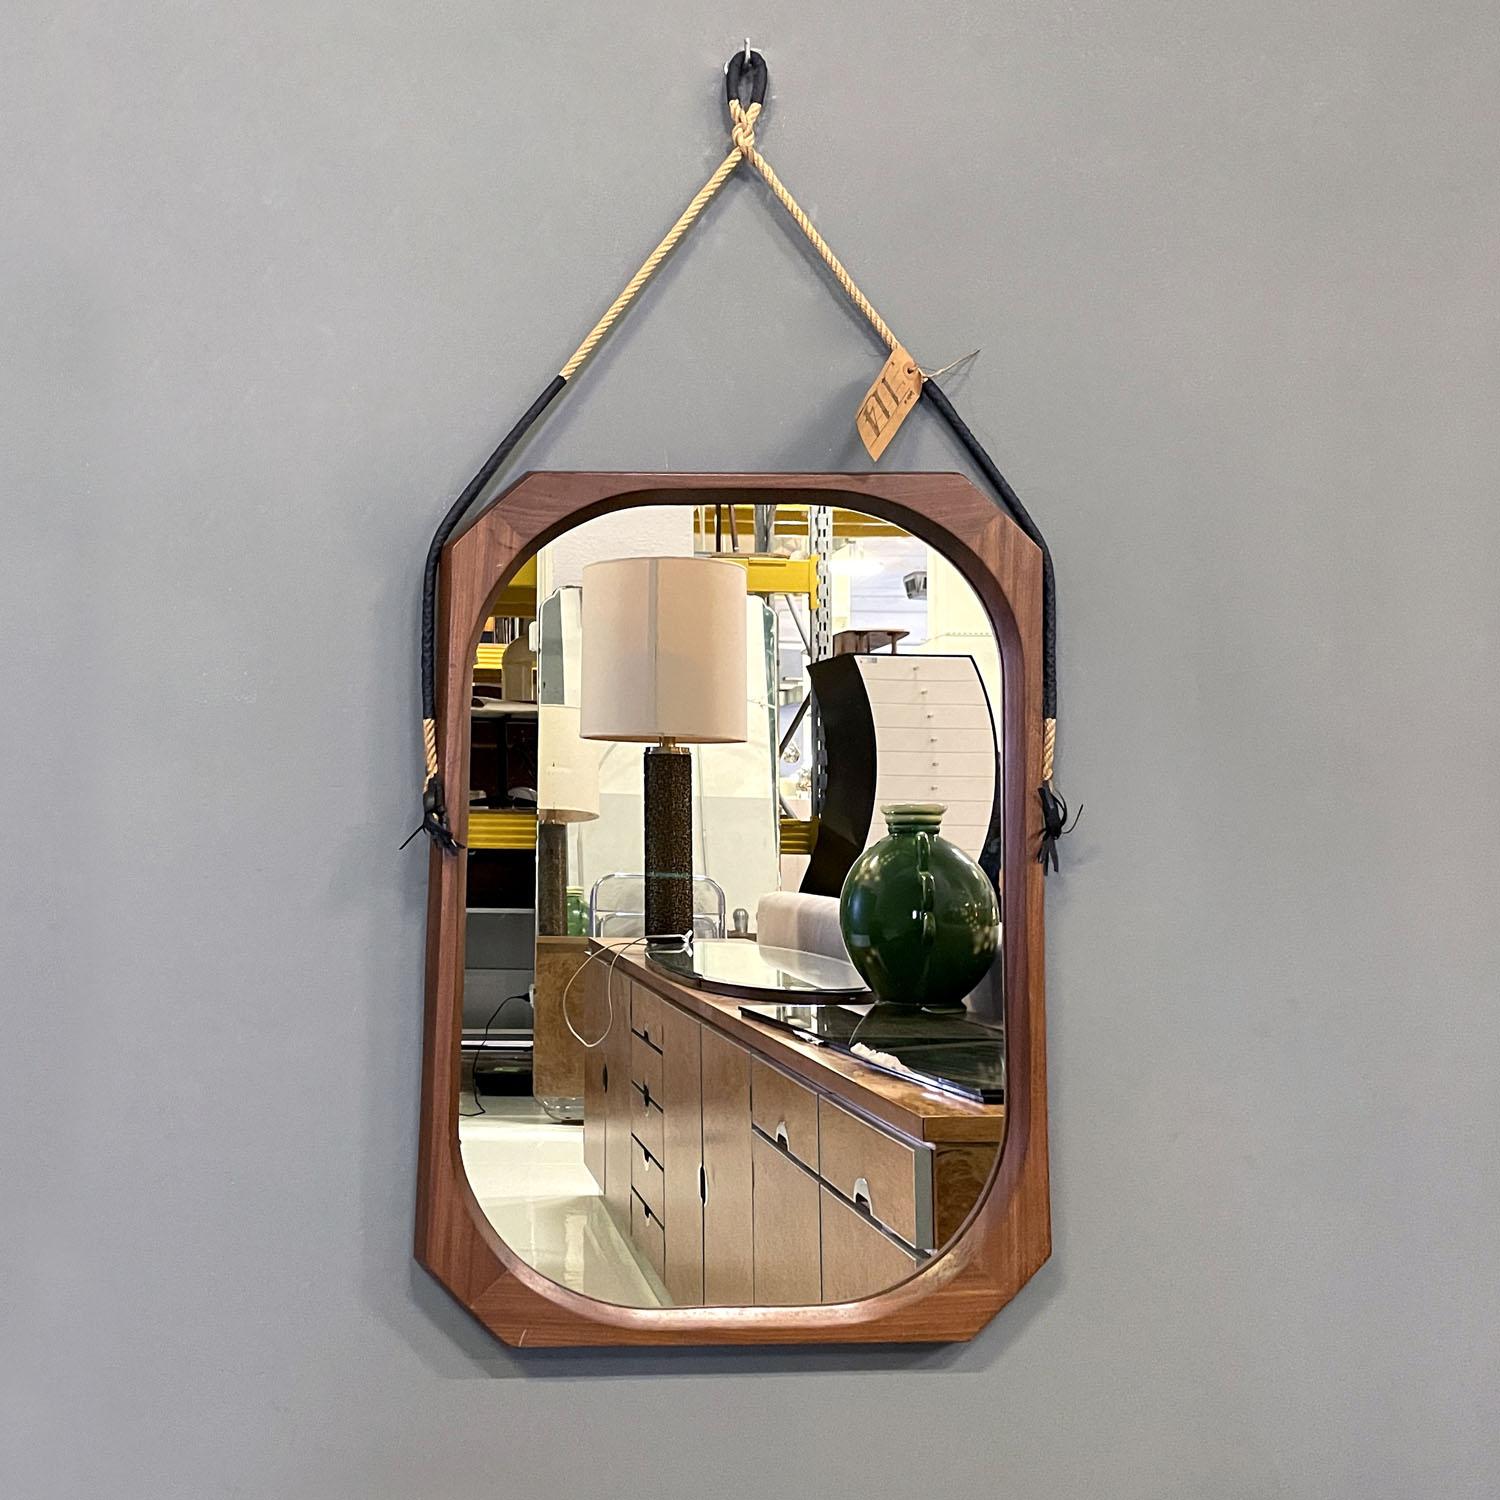 Italian mid-century modern rectangular wooden wall mirror with rope, 1960s
Rectangular wooden wall mirror. The frame has the corners cut externally and internally it is shaped to create a rounded shape. The frame is thick and the mirror part remains